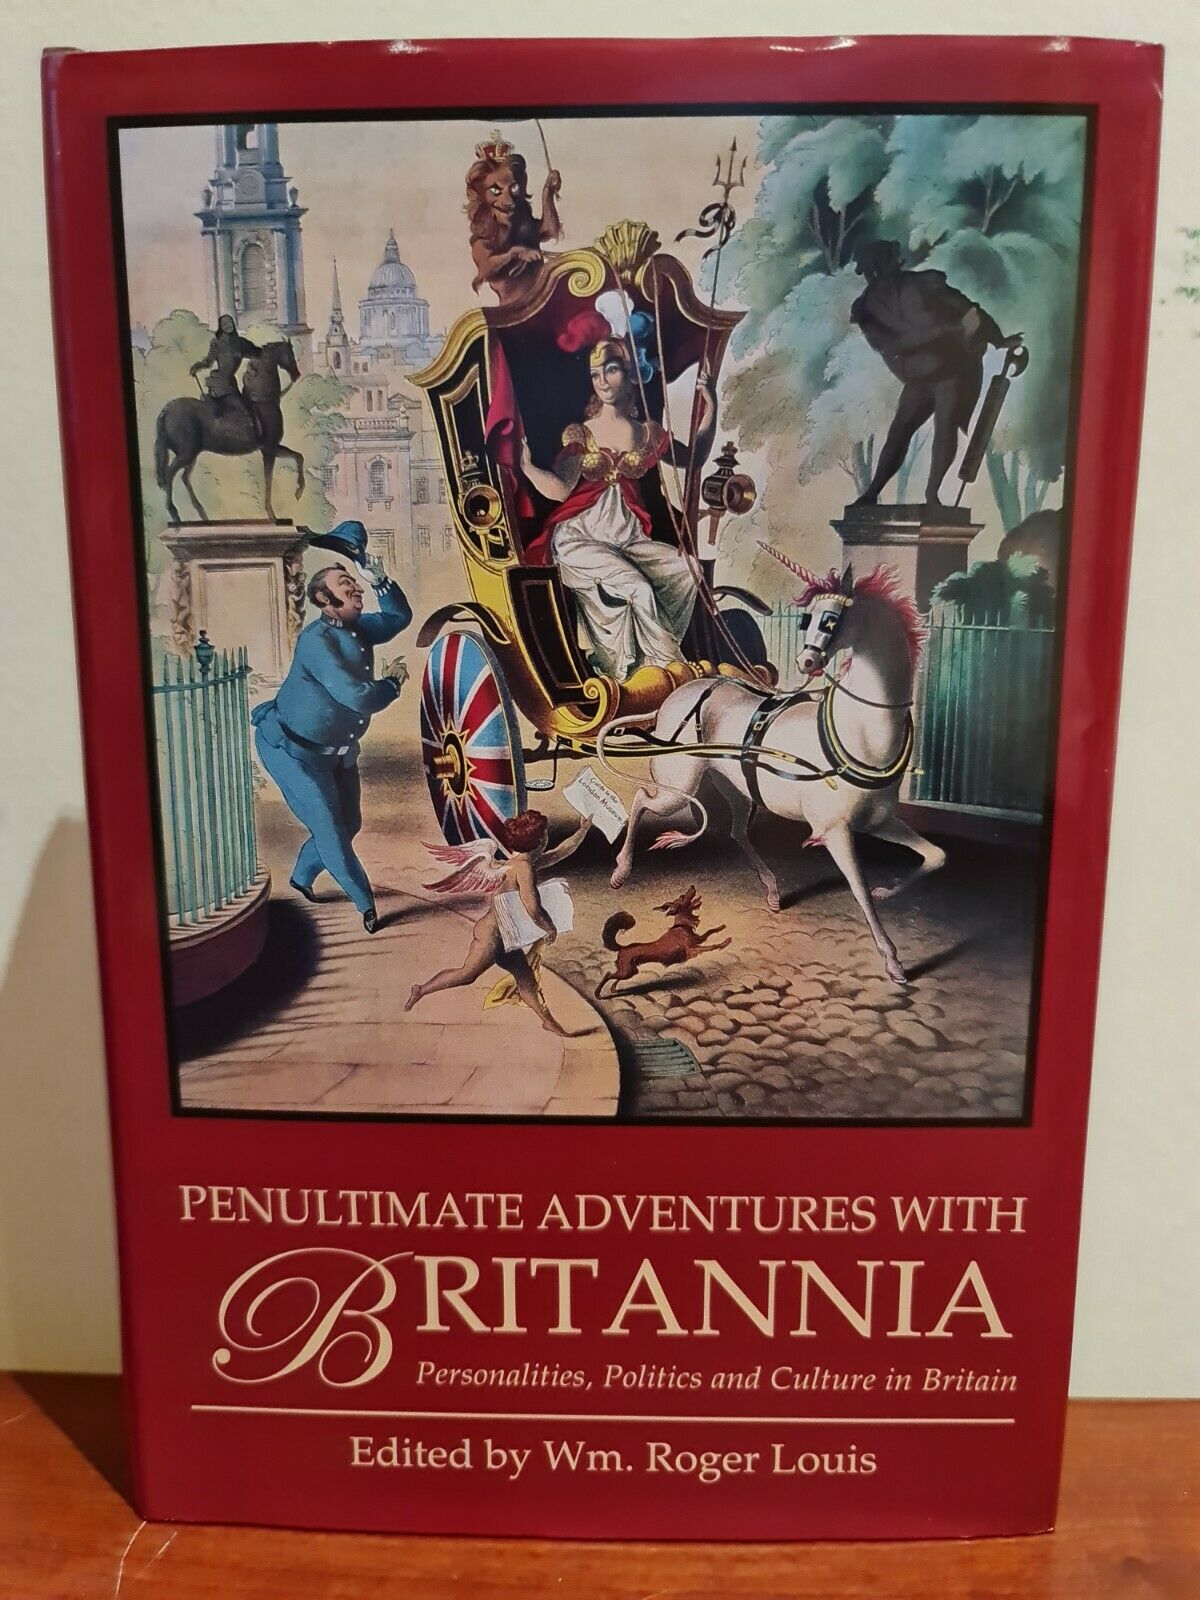 Penultimate Adventures with Britannia by Roger Louis